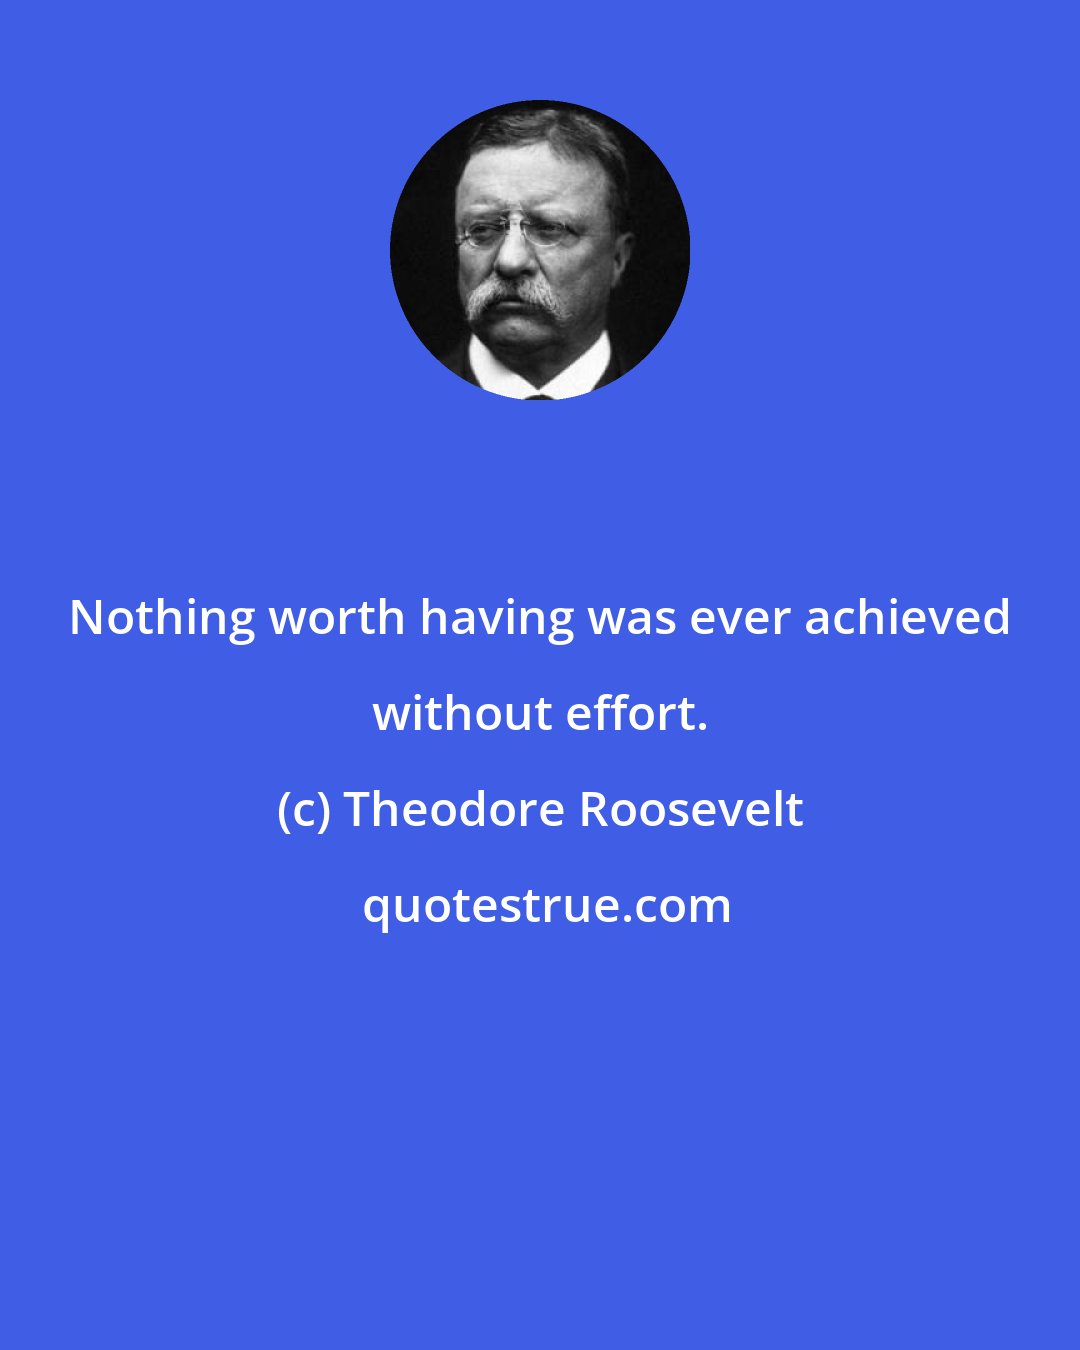 Theodore Roosevelt: Nothing worth having was ever achieved without effort.